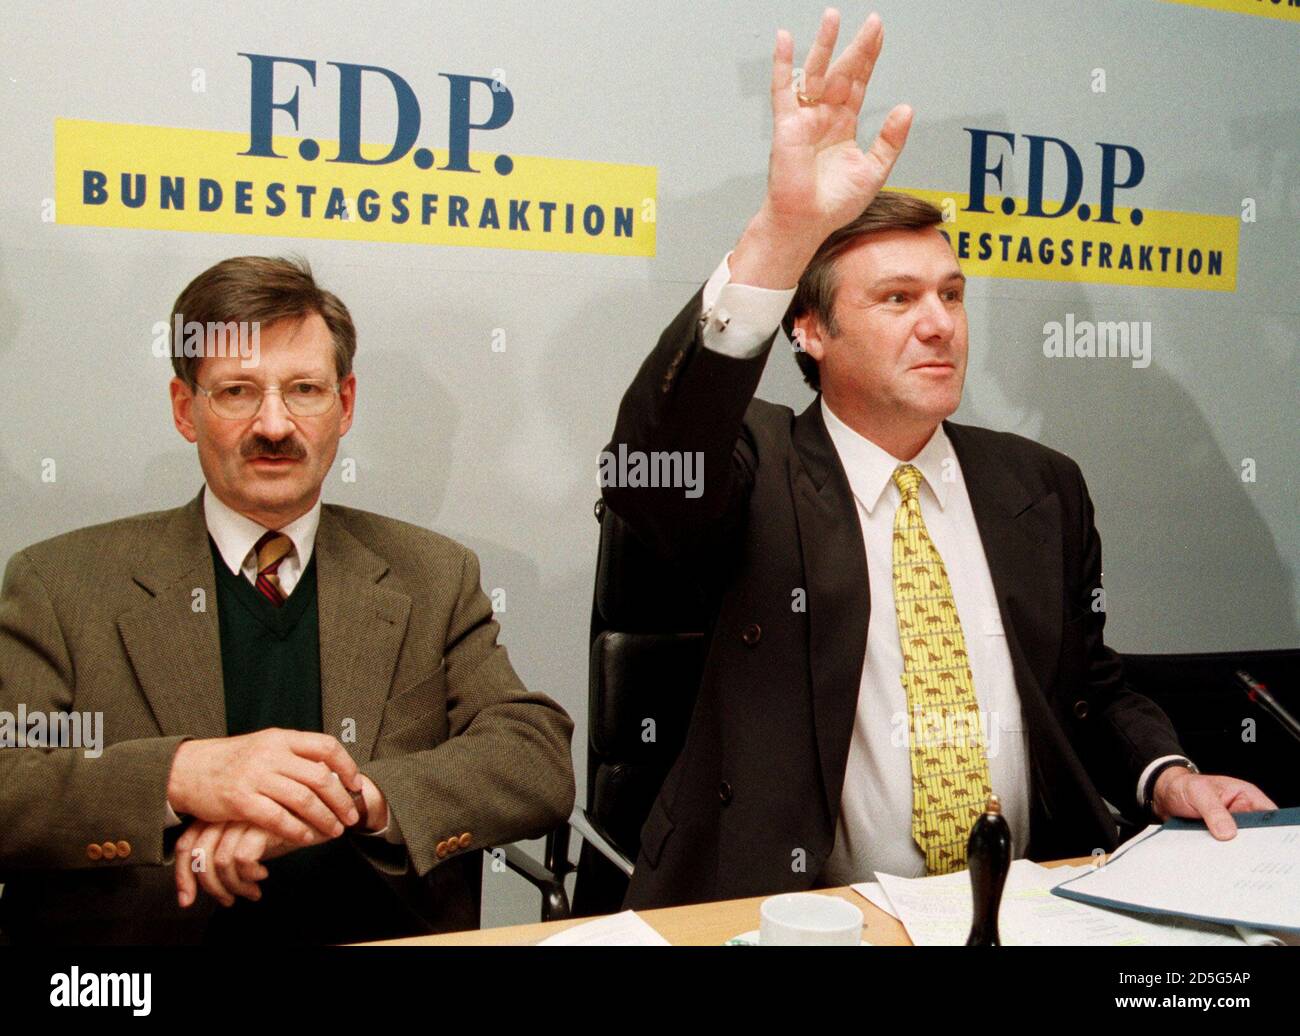 Free Democratic party leader Wolfgang Gerhard (R) gestures as FDP parliamenatry leader Hermann Otto Solms (L) looks on at the start of a meeting of the FDP parliamentary group, October 5. Gerhard is expected to succeed Solms as new FDP parliamenatry leader after loosing general elections.  MUR/ME Stock Photo